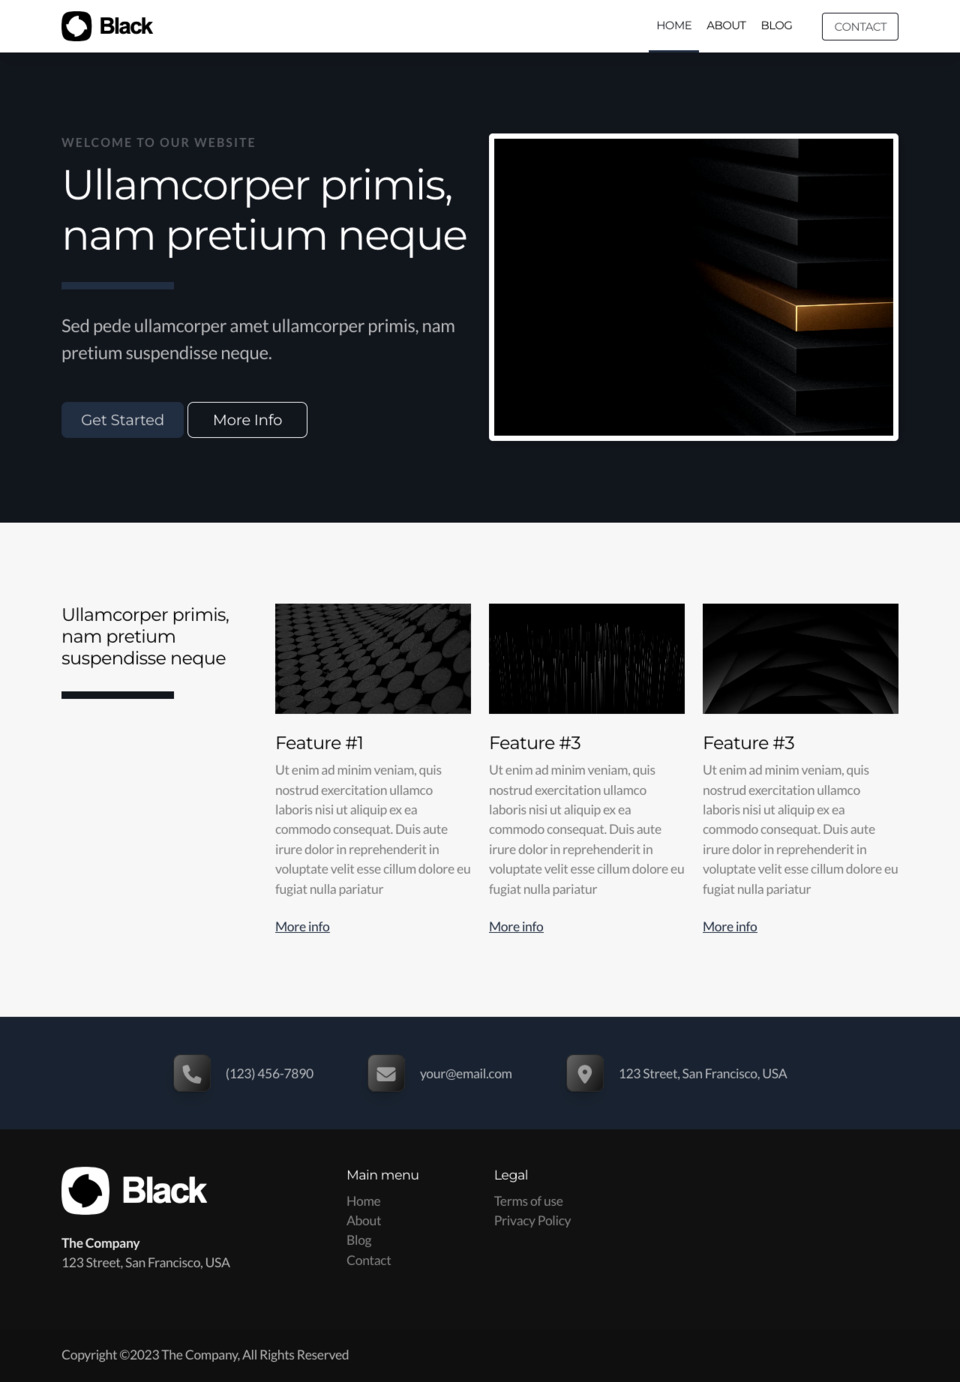 Black Website Template - Ideal for businesses looking to convey authority, modernity, and a sense of mystery. Perfect for luxury brands, high-quality products, and businesses that want to capture attention.